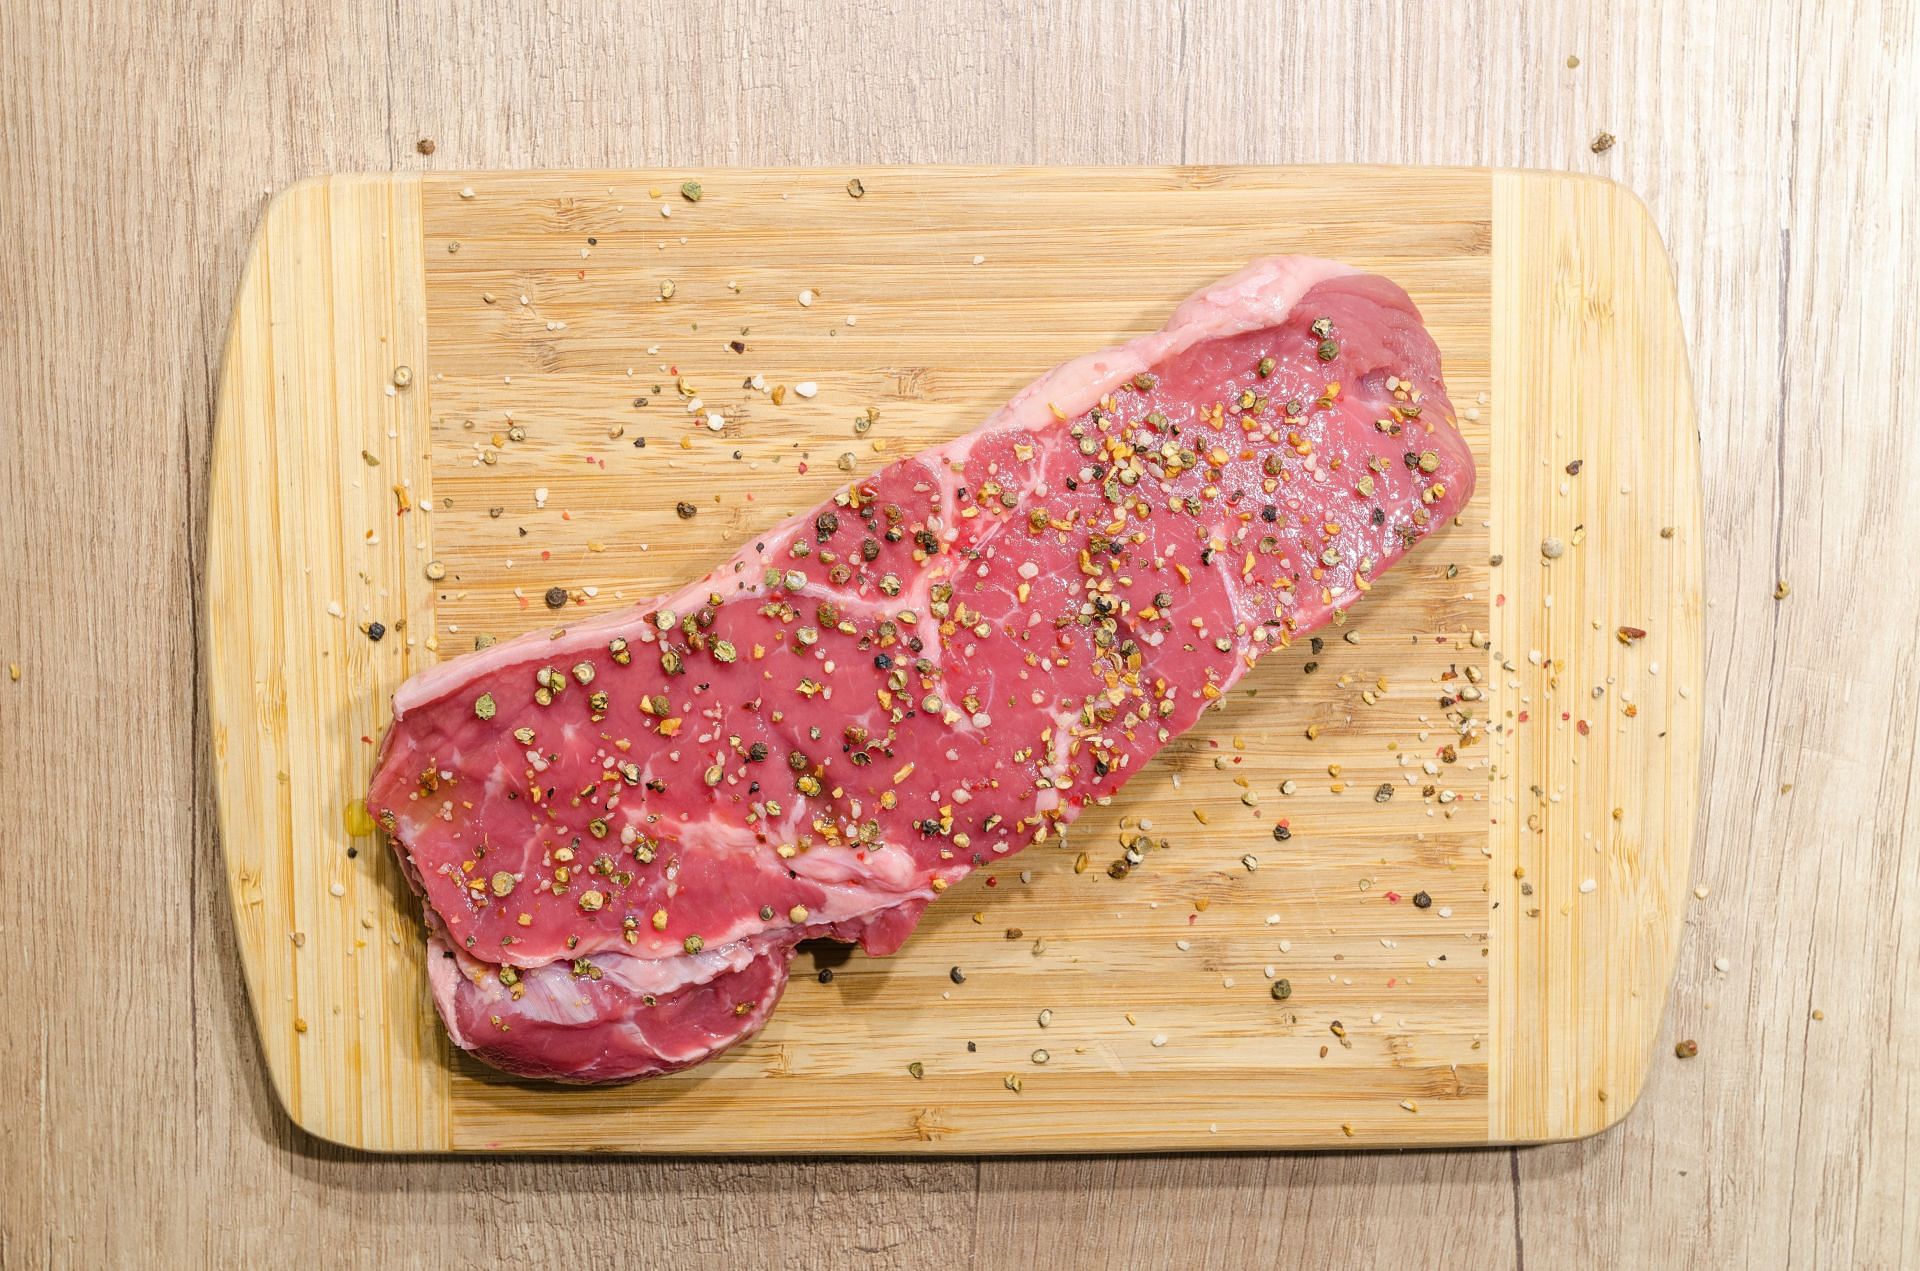 Include more meat in your diet to get the required amount of collagen. (Image via Pexels/Lukas)